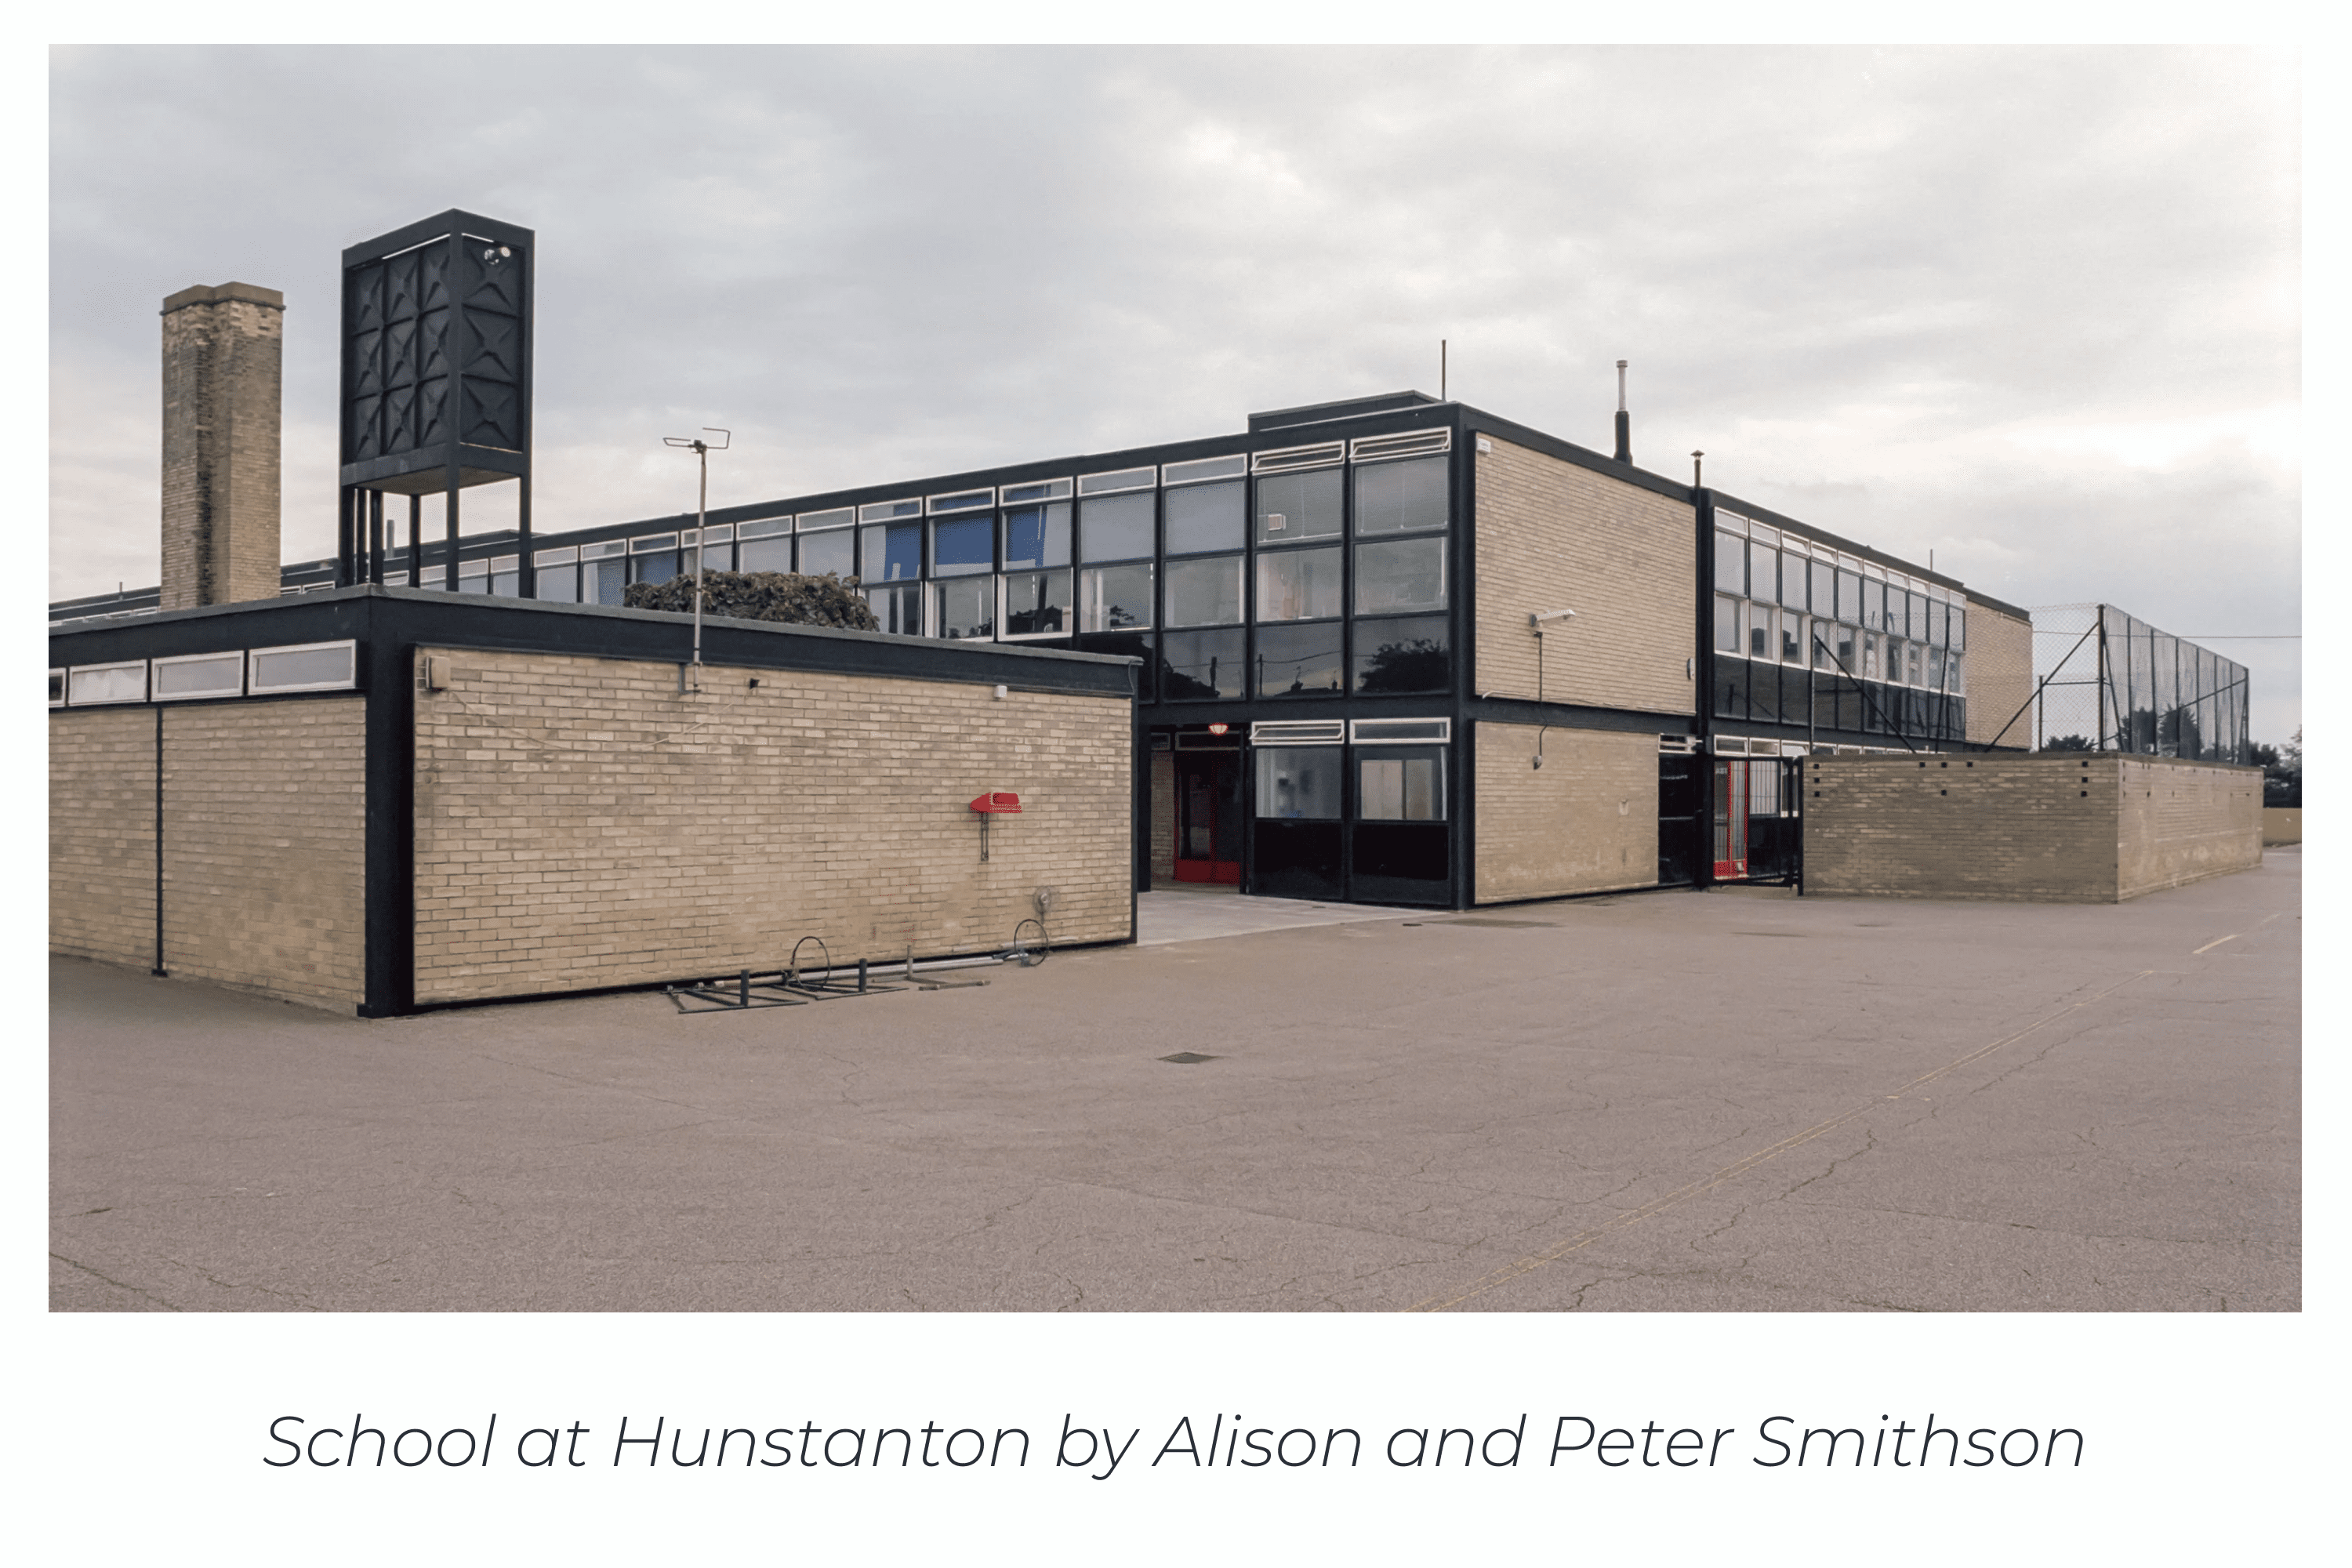 School at Hunstanton by Alison and Peter Smithson.